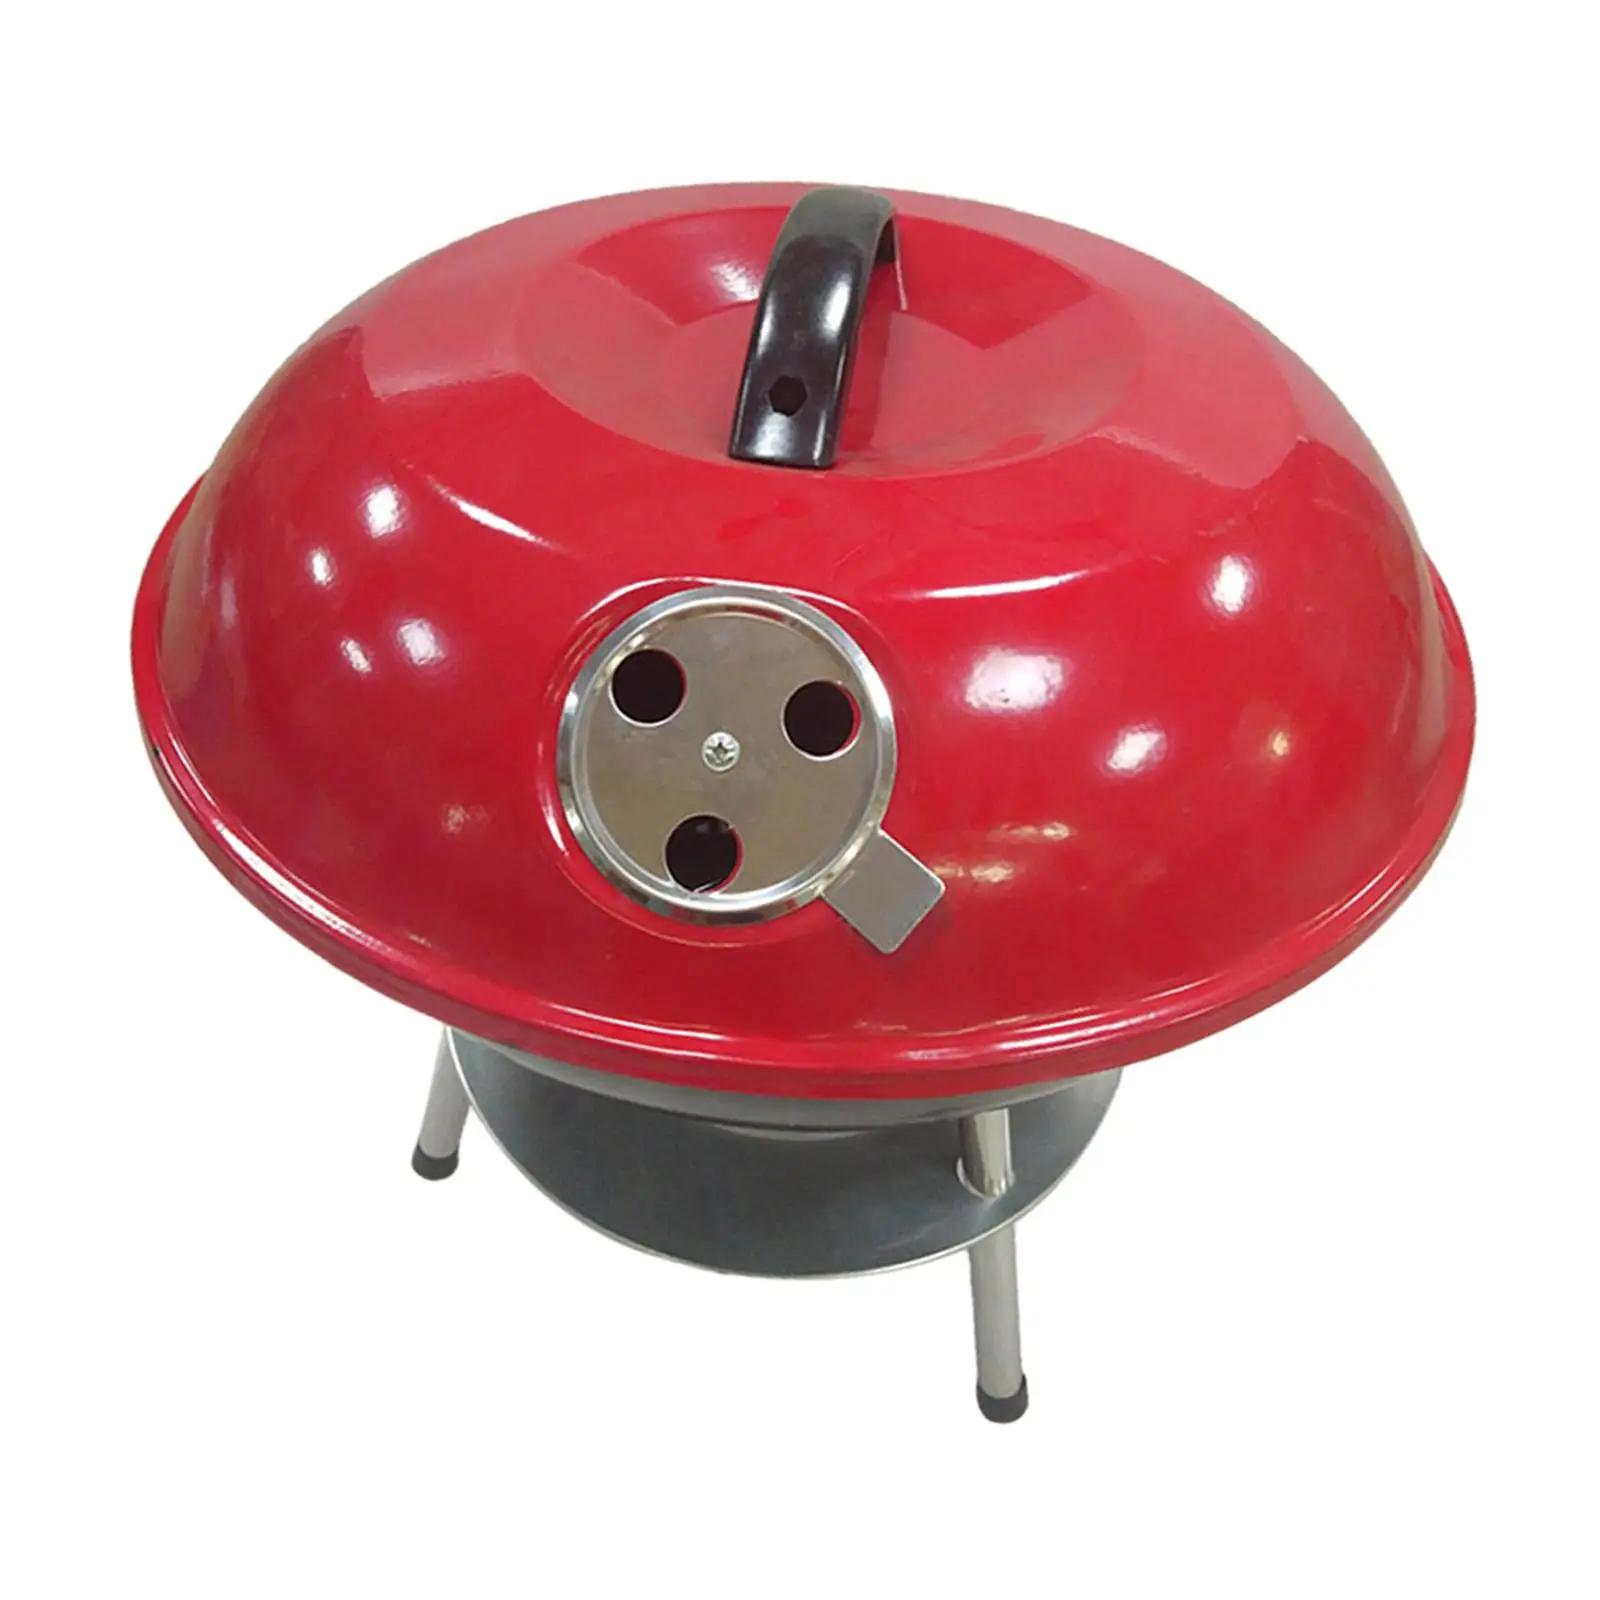 Barbecue Grill Stove Small Charcoal Grill for Picnic Patio Outdoor Grilling